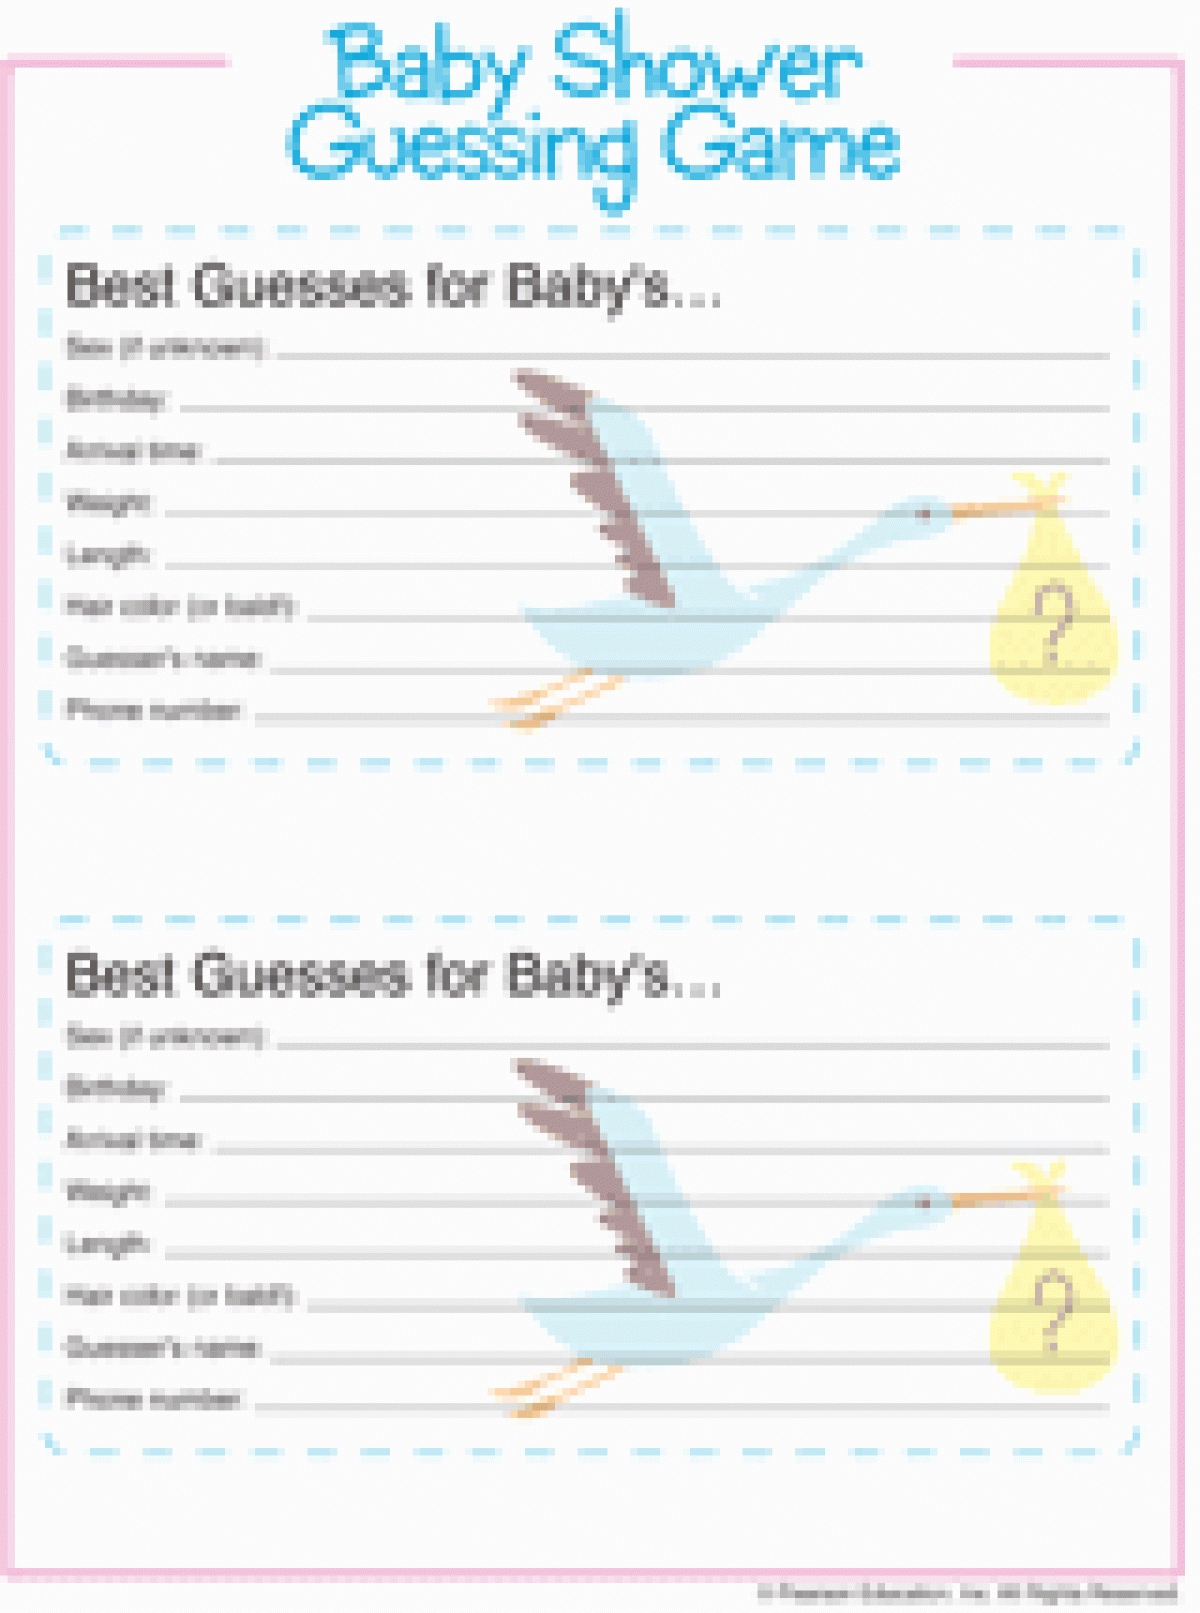 babies due date guess large print out 29